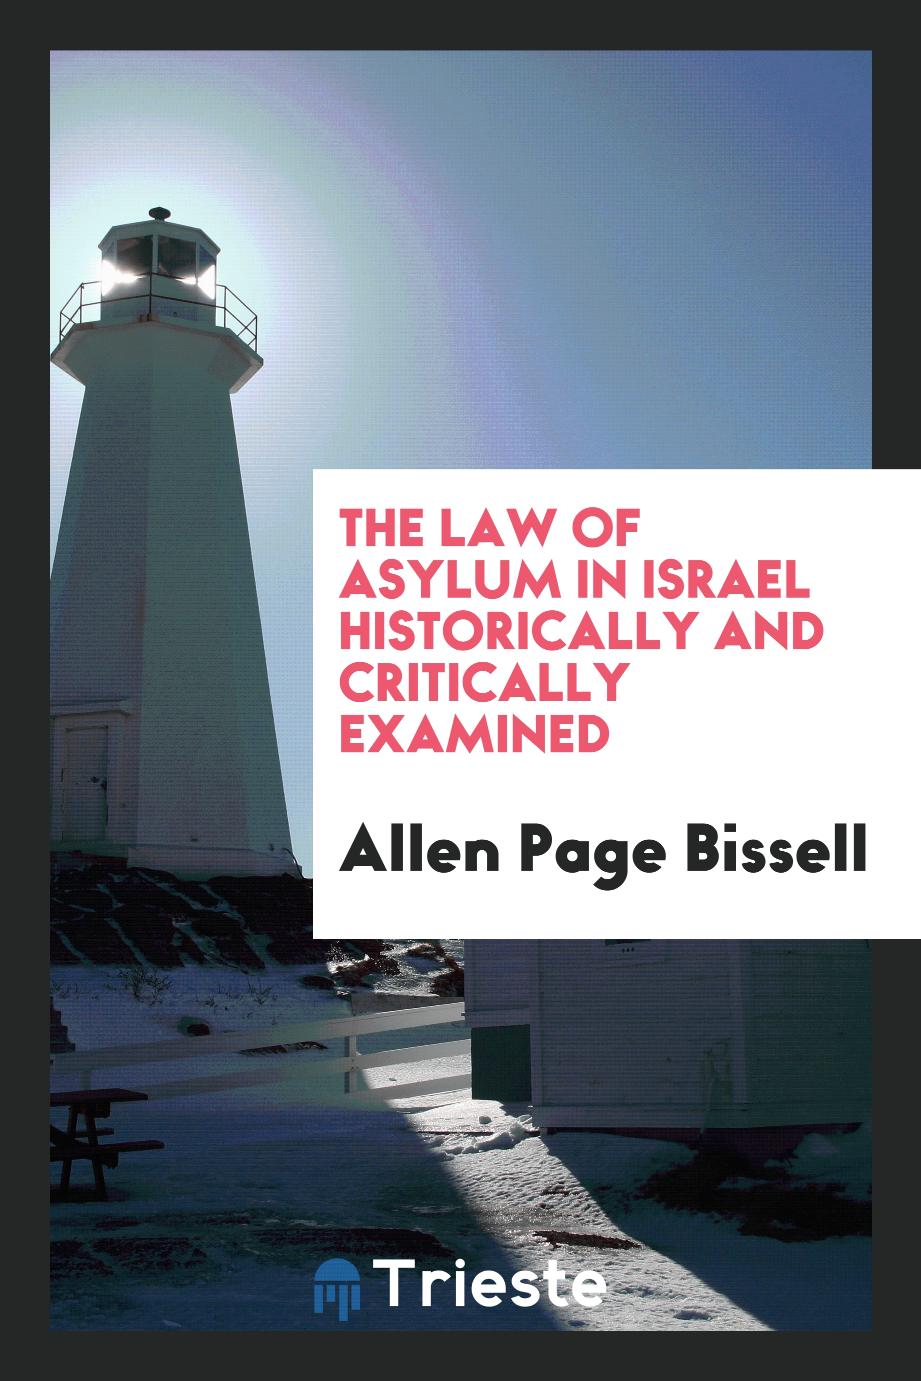 The Law of Asylum in Israel Historically and Critically Examined